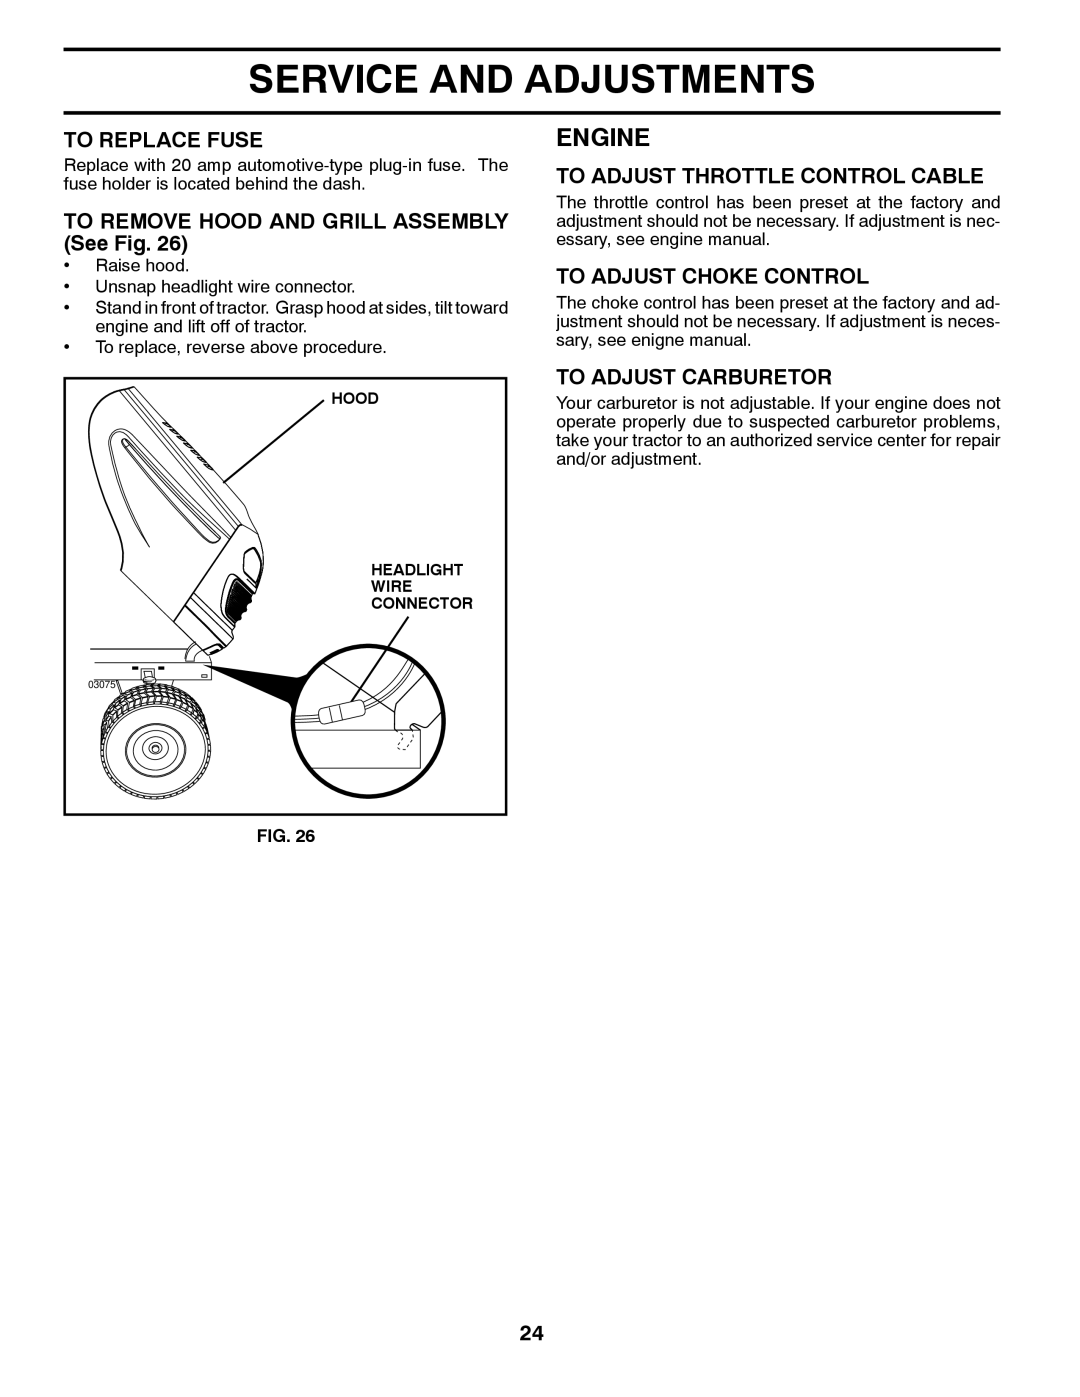 Poulan PP21H42 manual To Replace Fuse, To Remove Hood and Grill Assembly See Fig, To Adjust Throttle Control Cable 